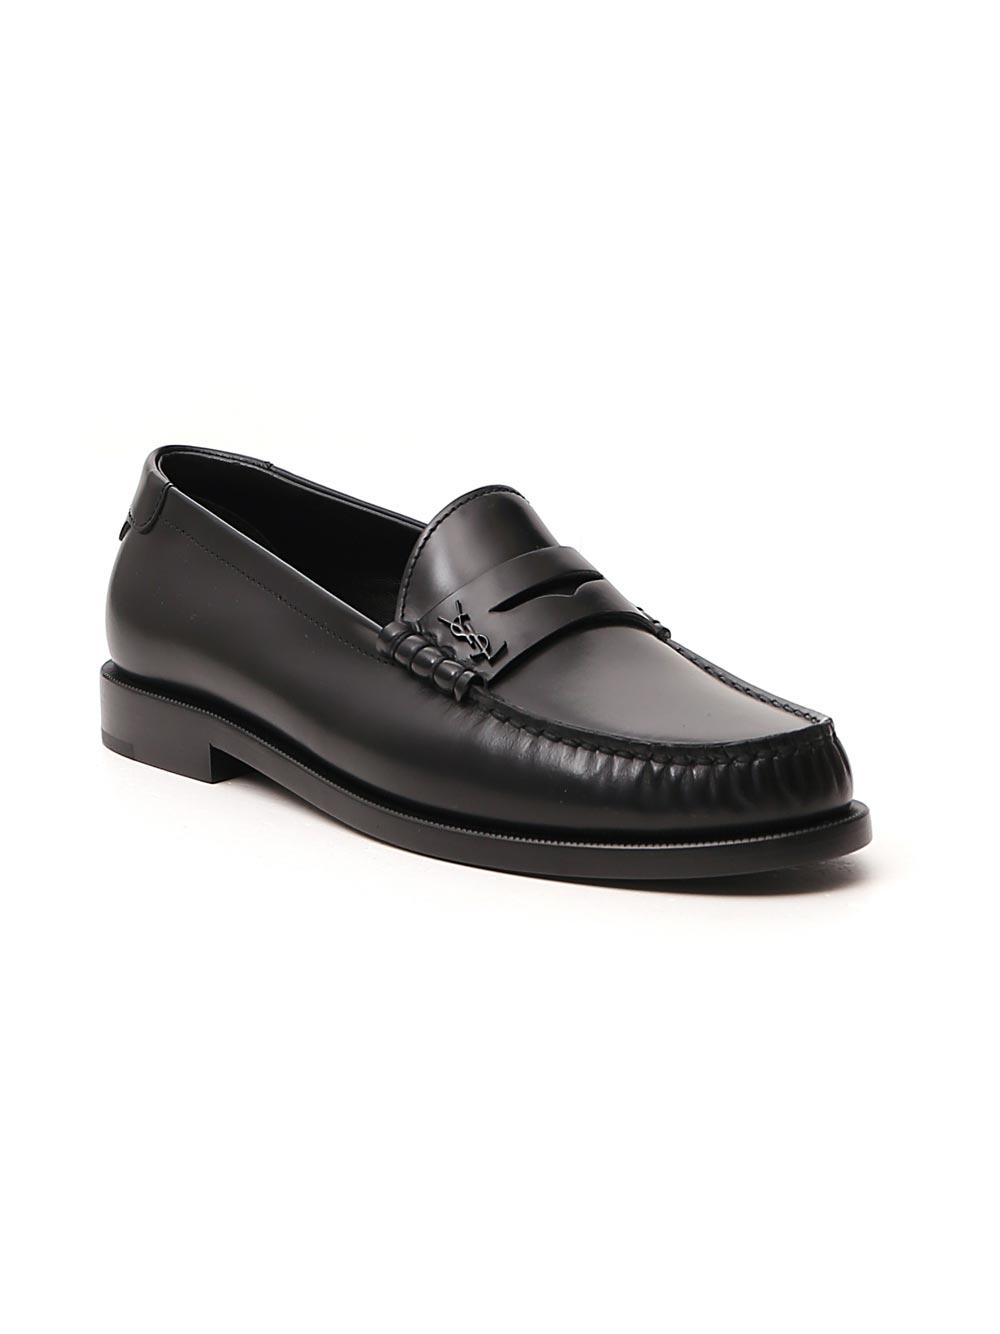 Saint Laurent Leather Monogram Penny Loafers in Black - Lyst